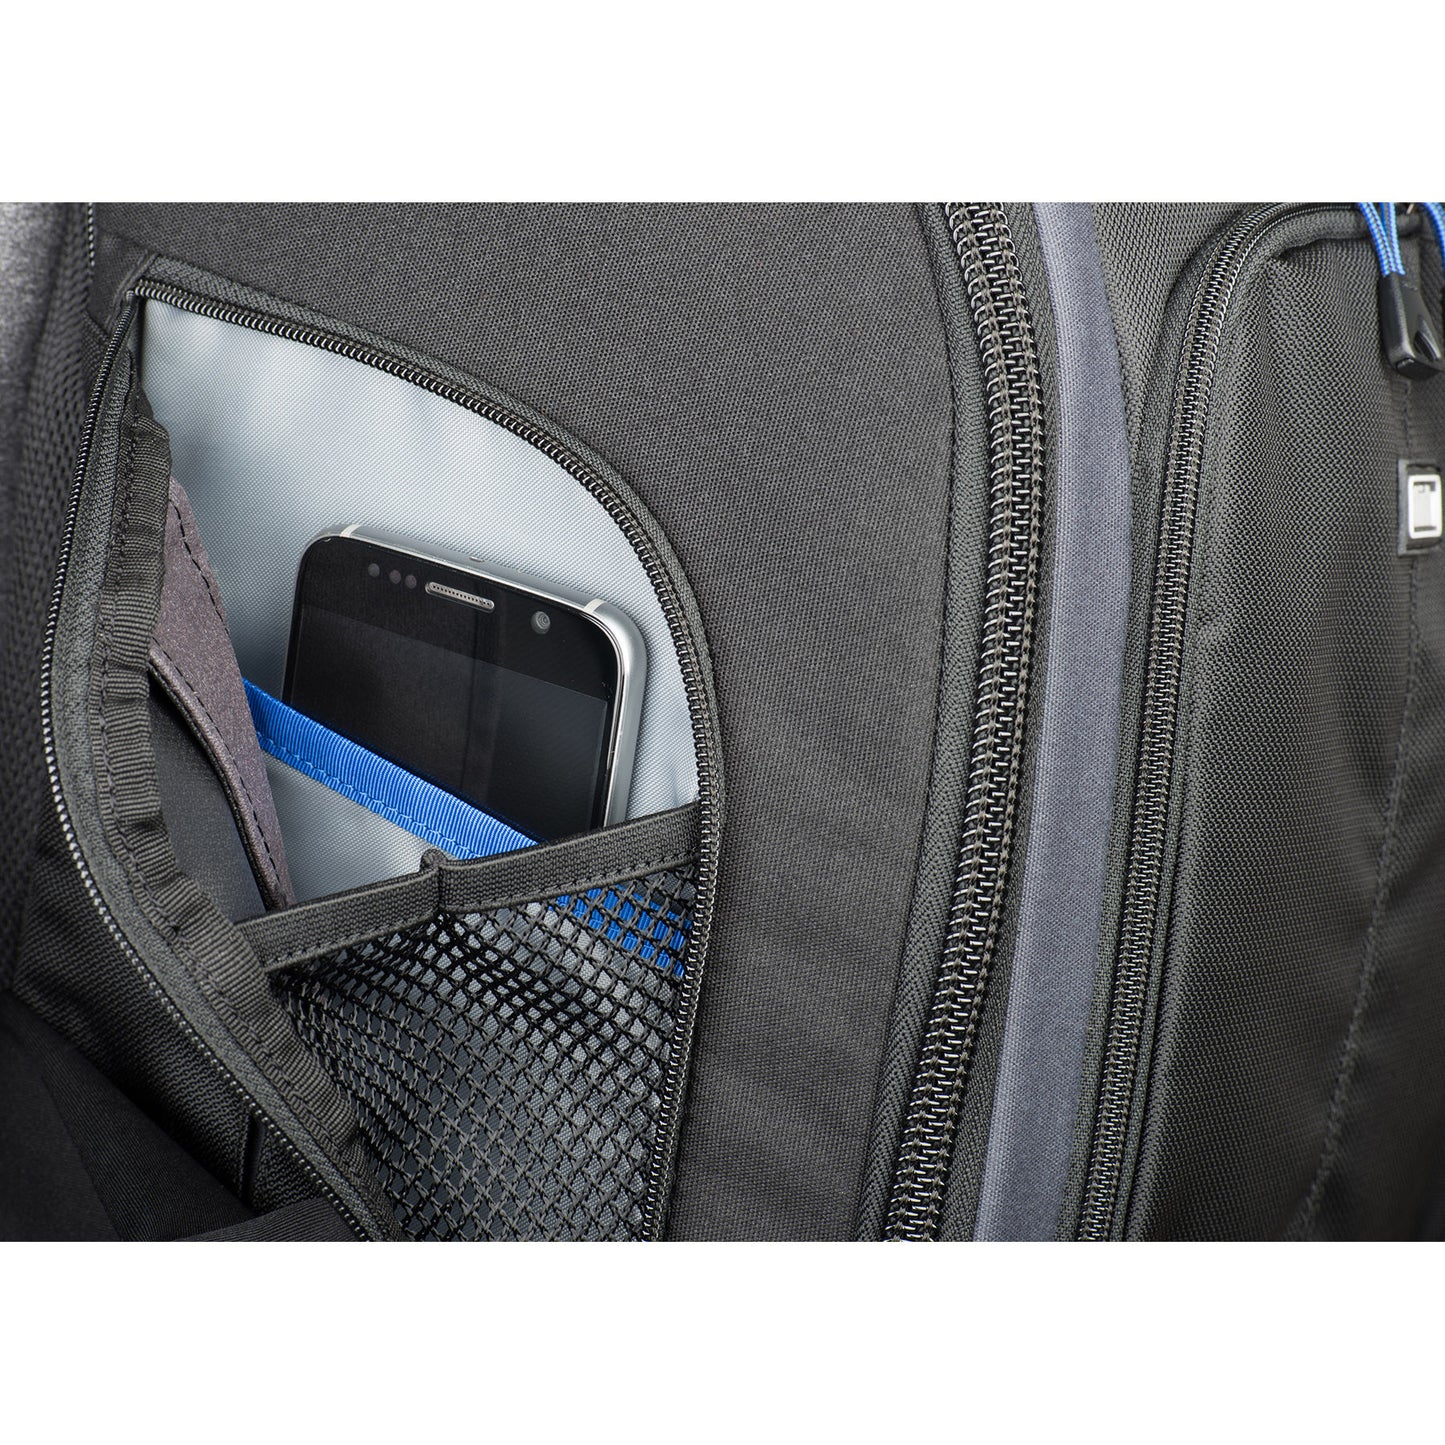 
                  
                    Dedicated smartphone pocket fits today’s large phones with a 5.5” (14cm) screen size
                  
                